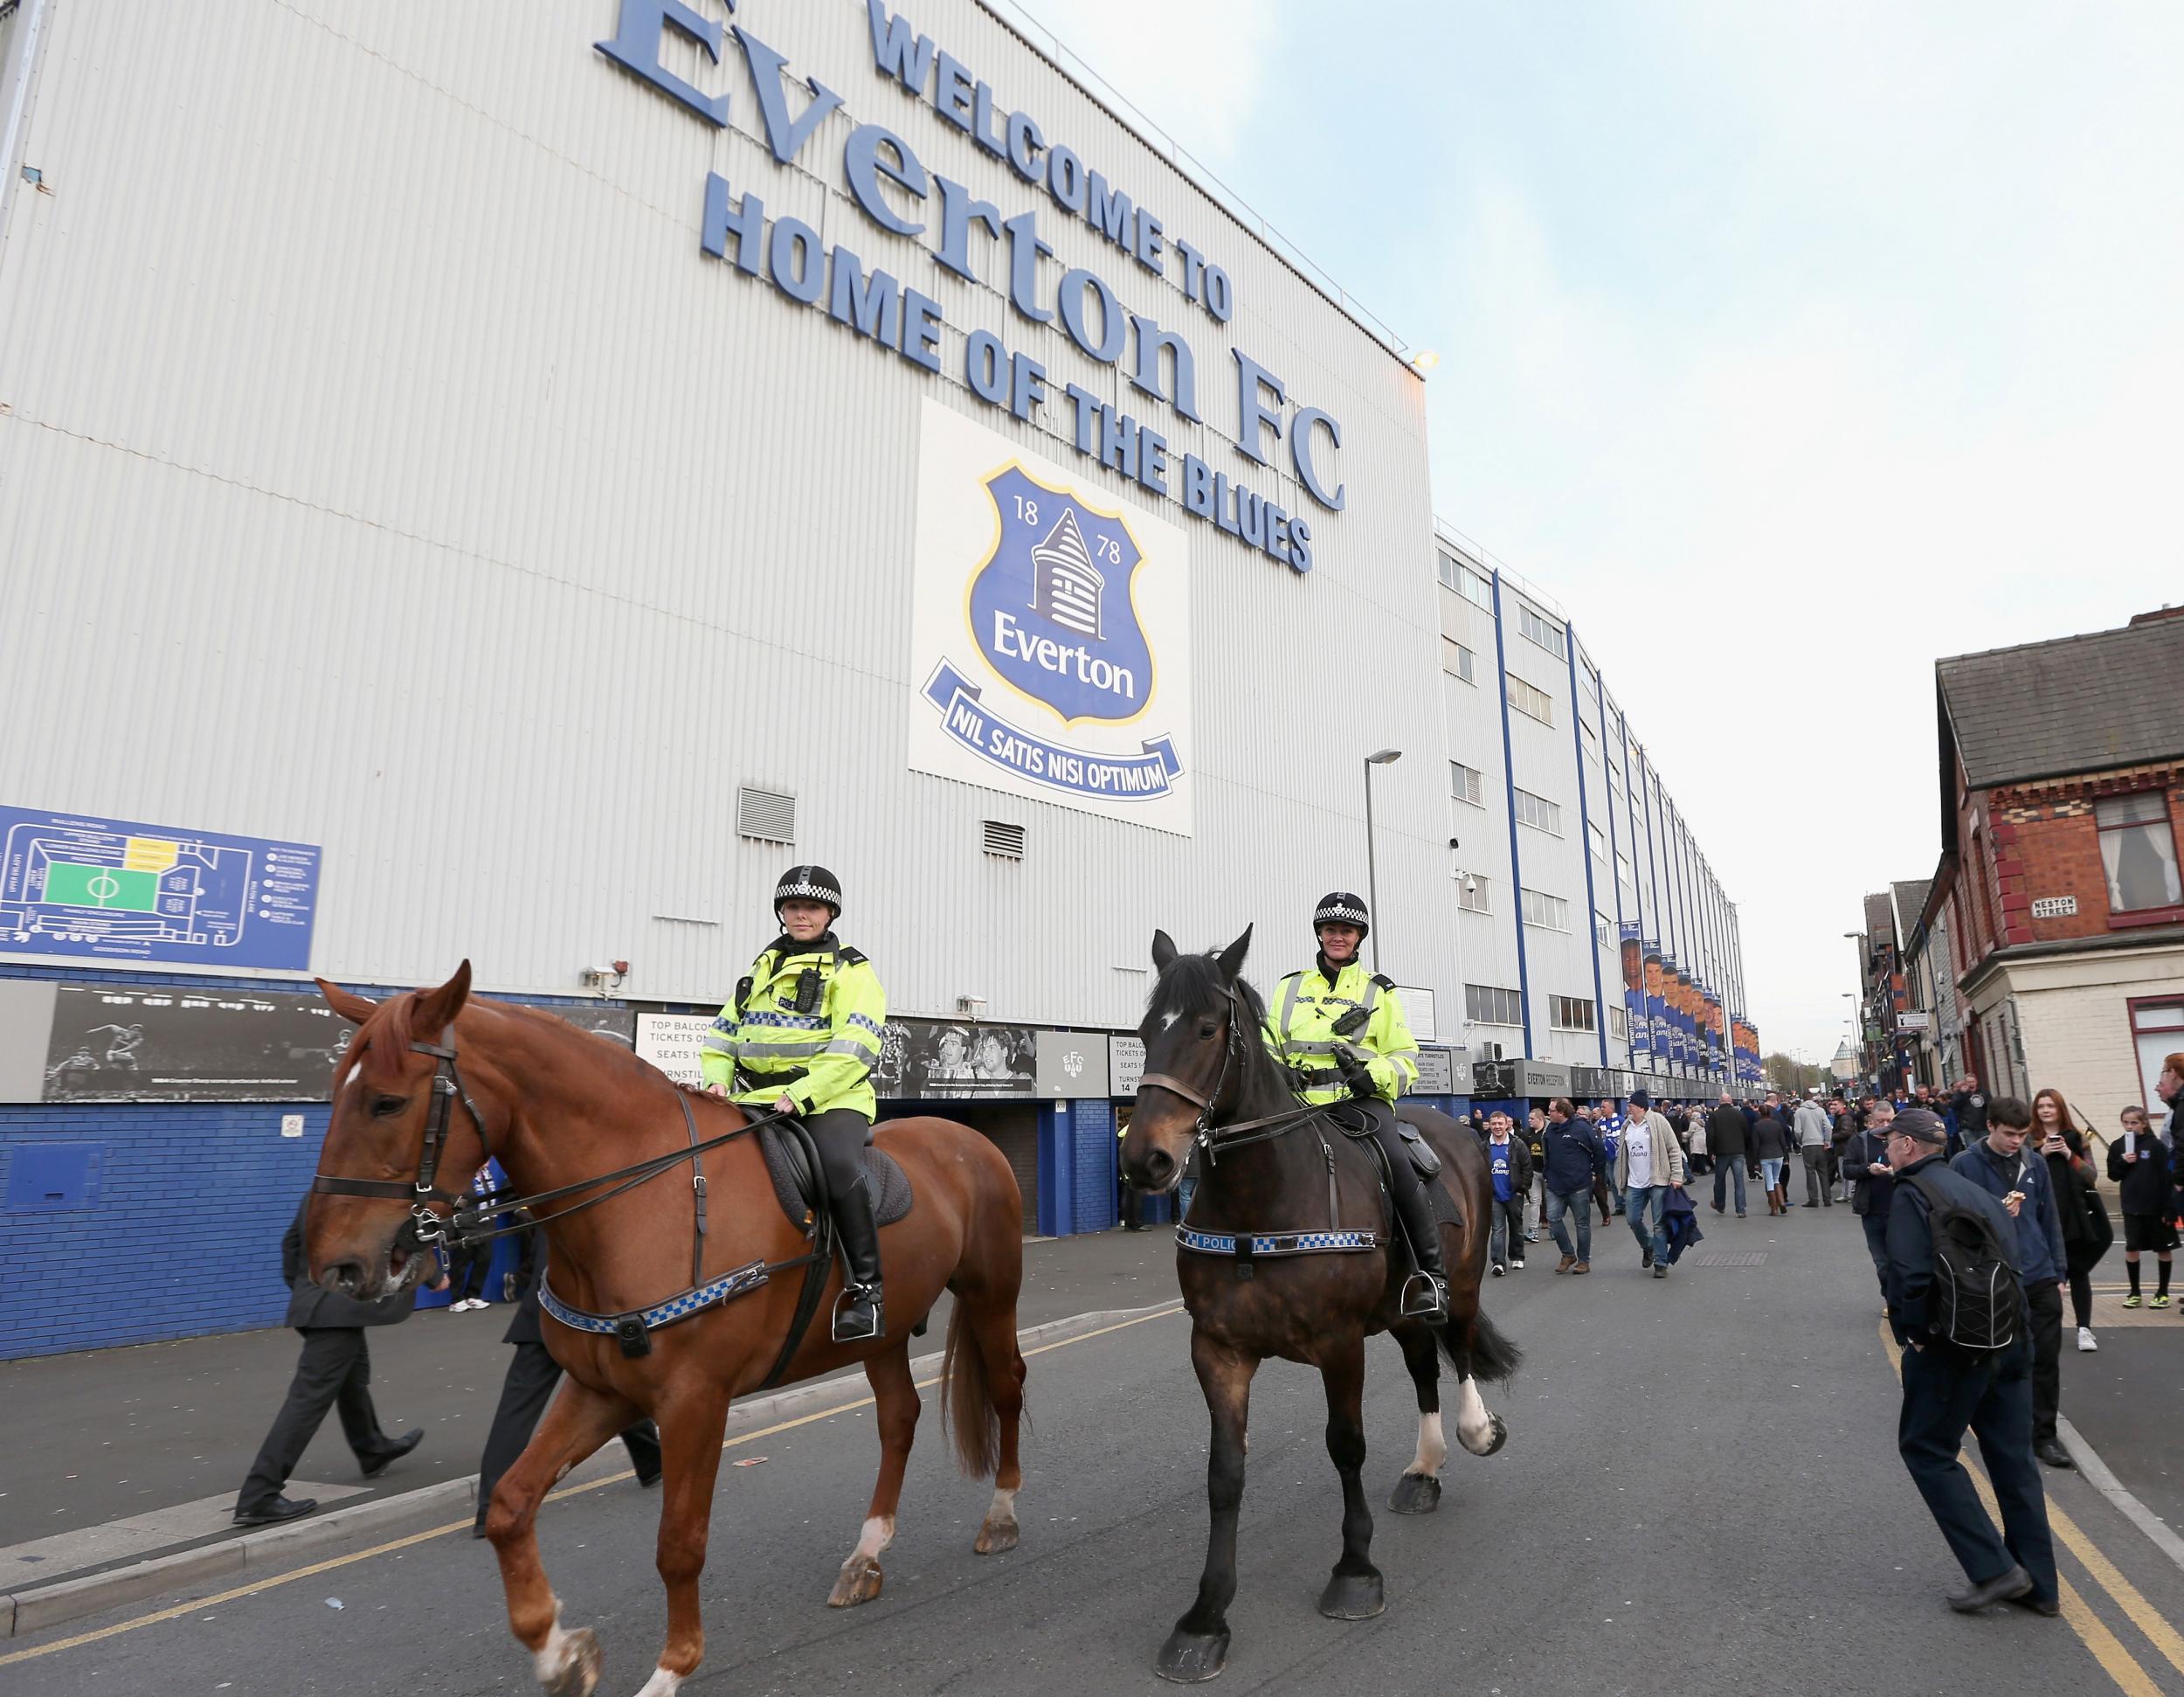 Mounted Merseyside Police officers patrol outside Goodison Park